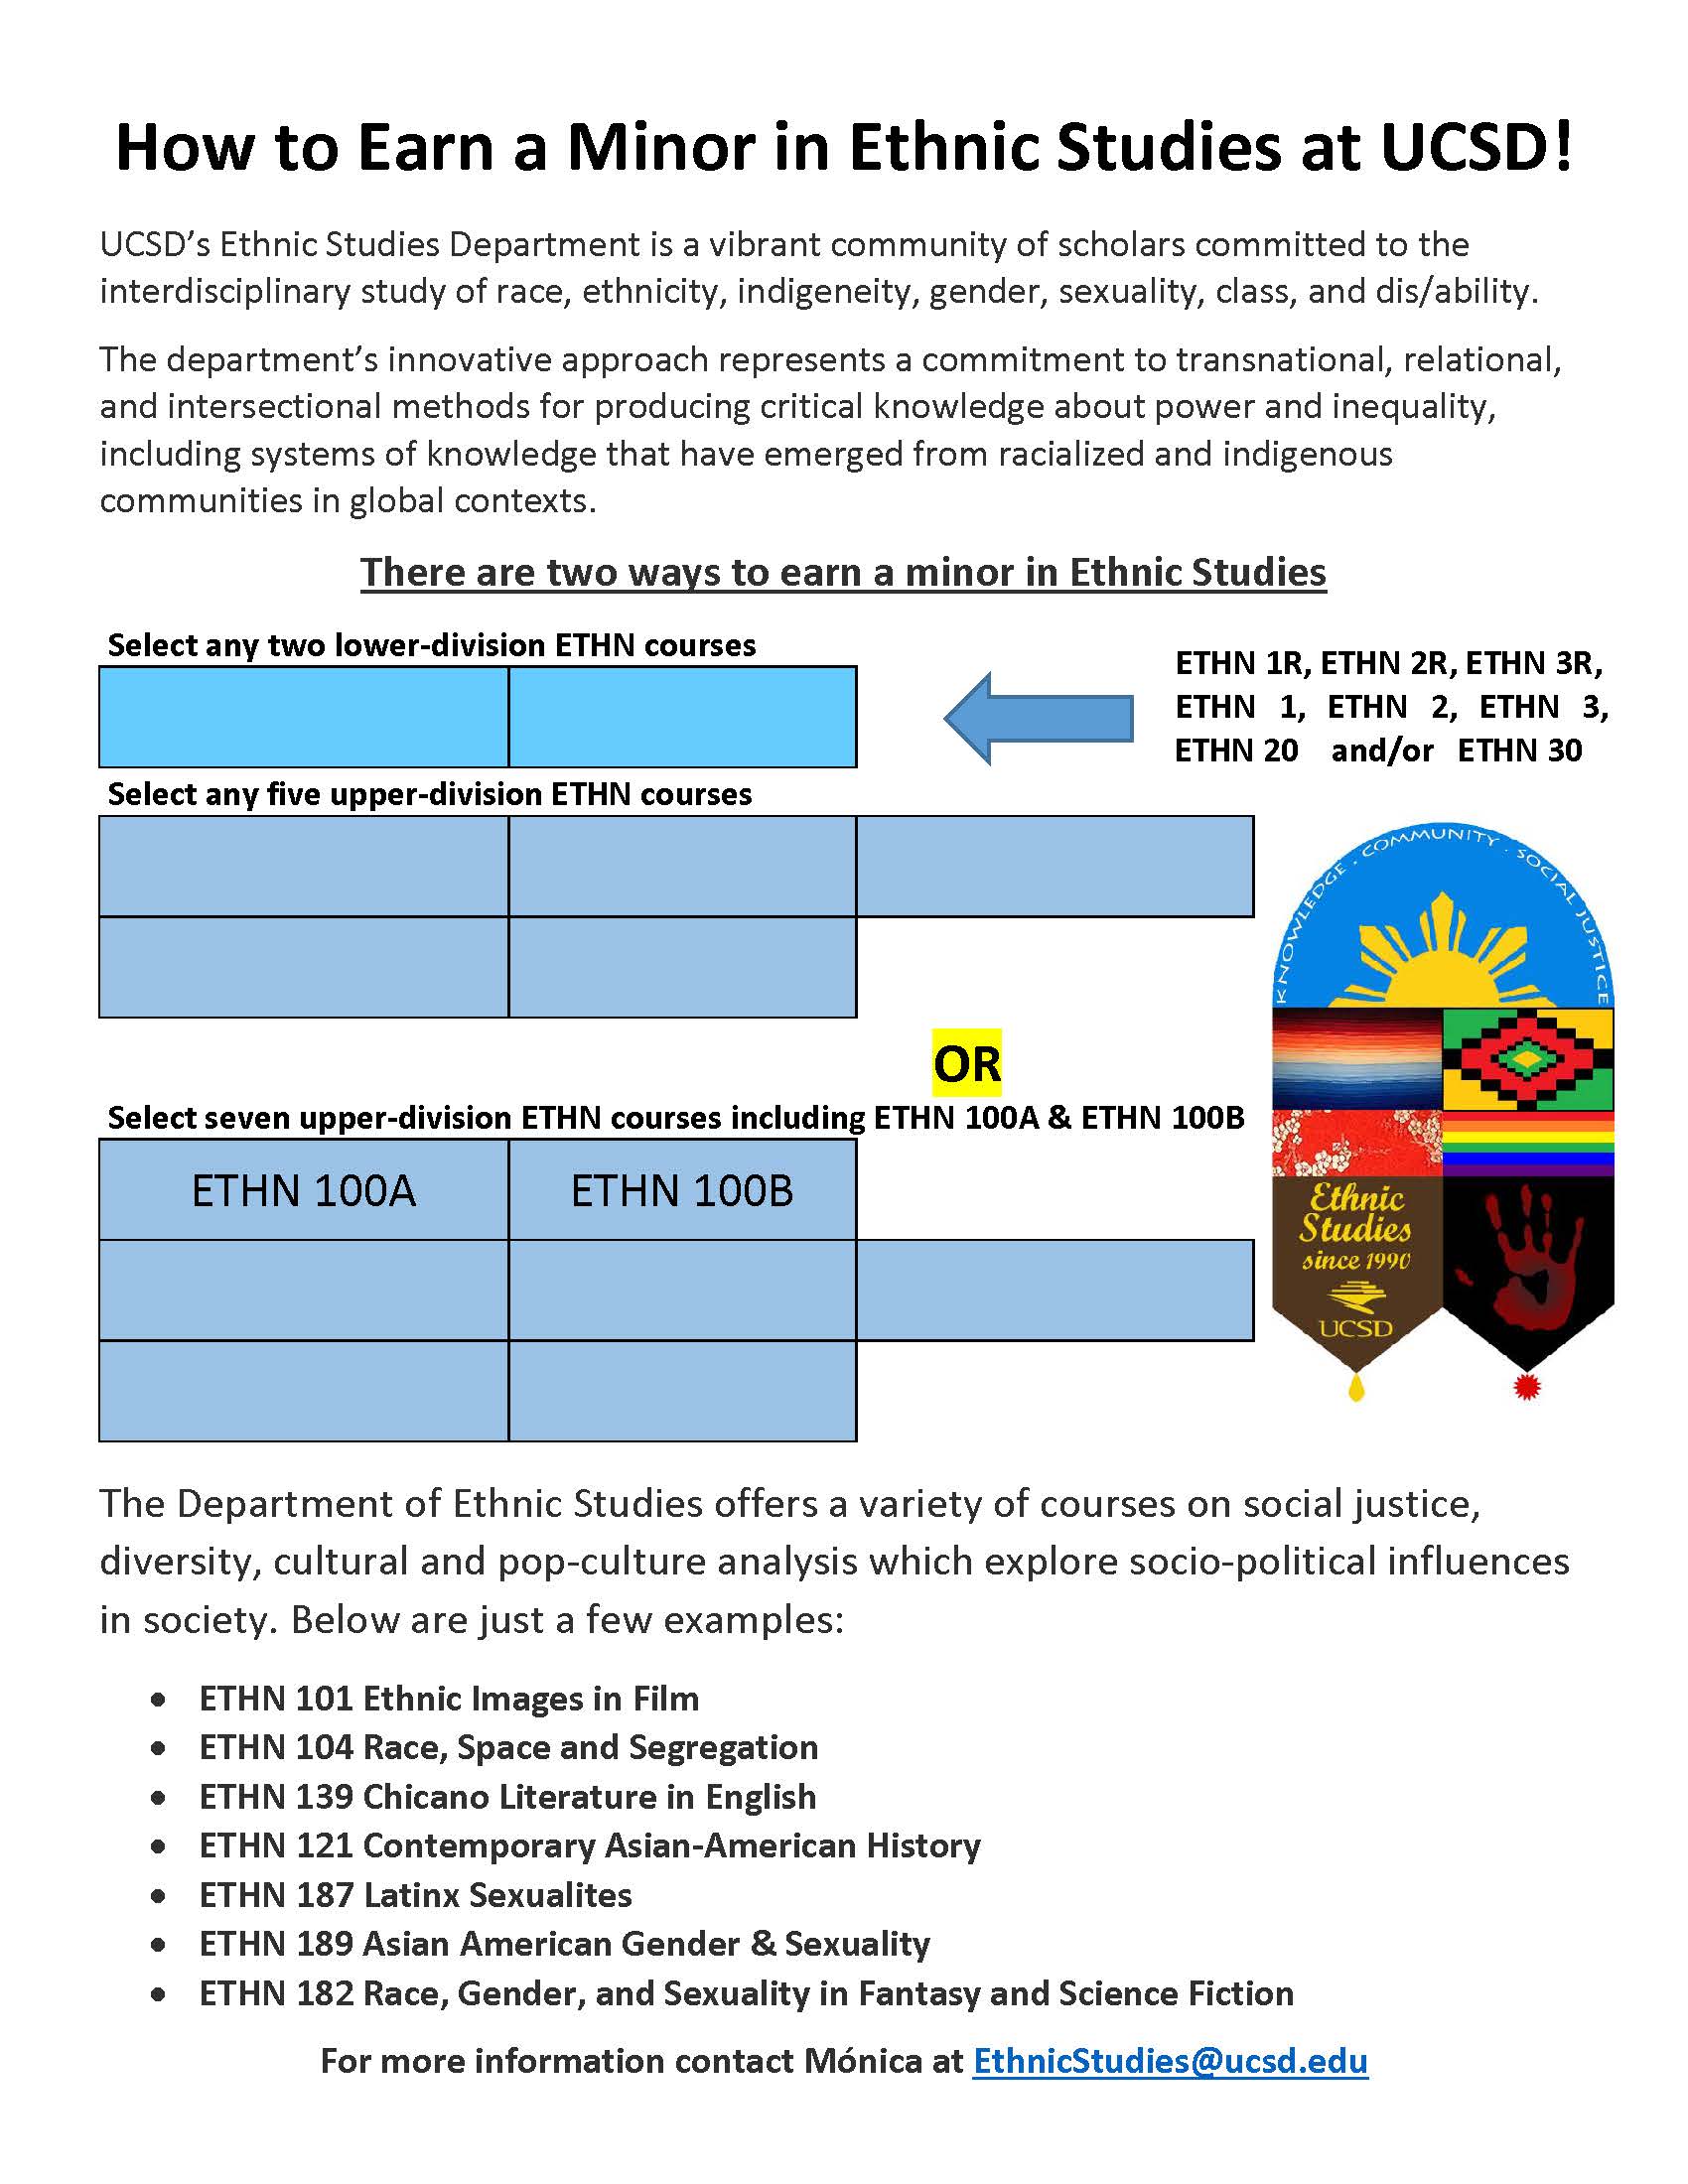 How-to-Earn-a-Minor-in-Ethnic-Studies-at-UCSD-7.26.2022.jpg